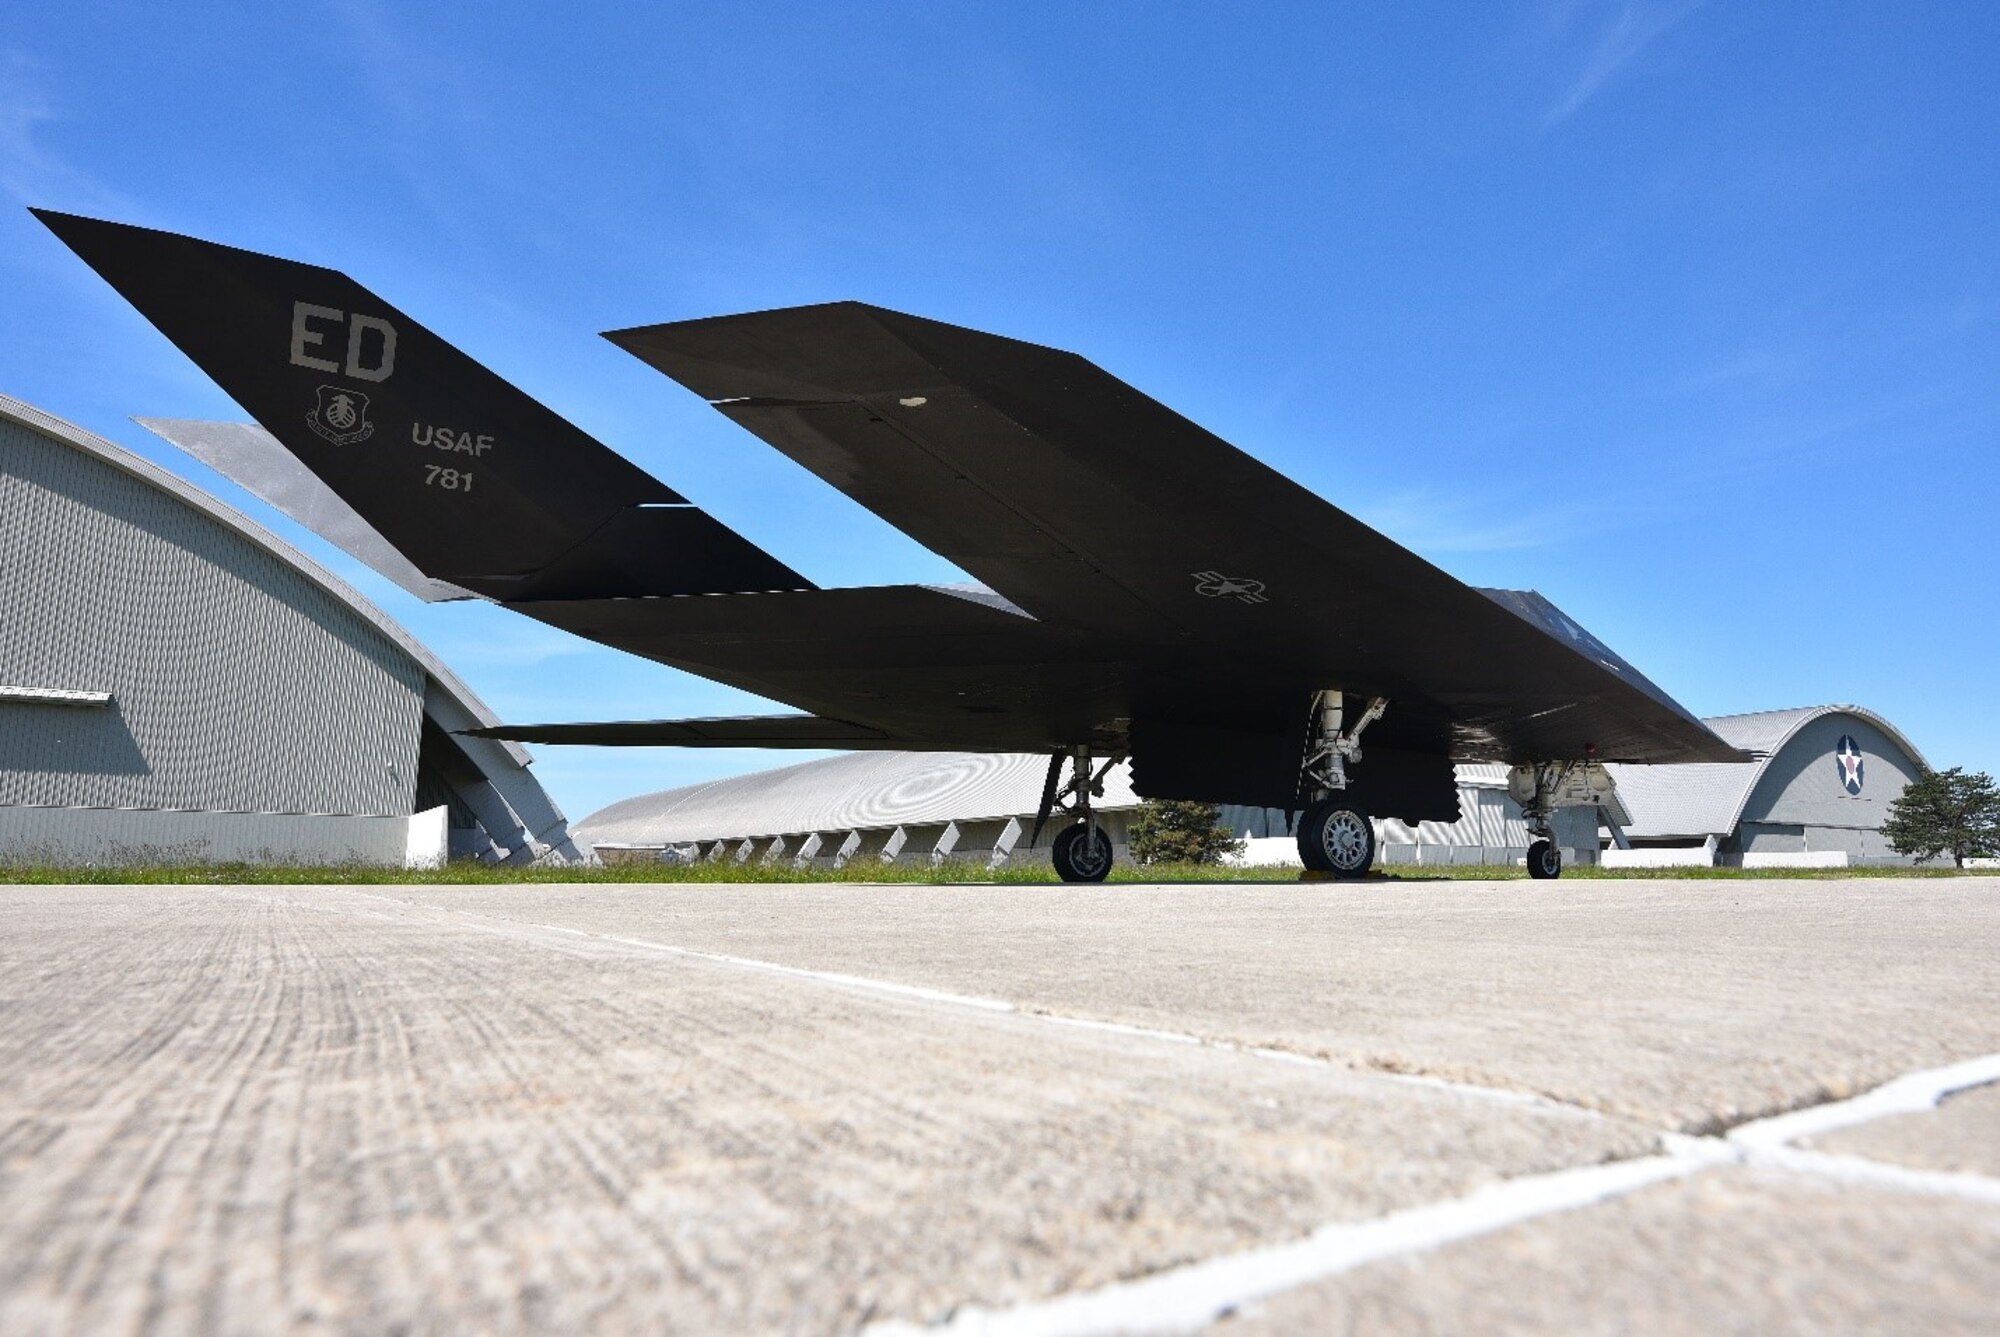 The retired Lockheed F-117A Nighthawk is pictured at the National Museum of the U.S. Air Force on Wright-Patterson Air Force Base, Ohio. (U.S. Air Force photo)